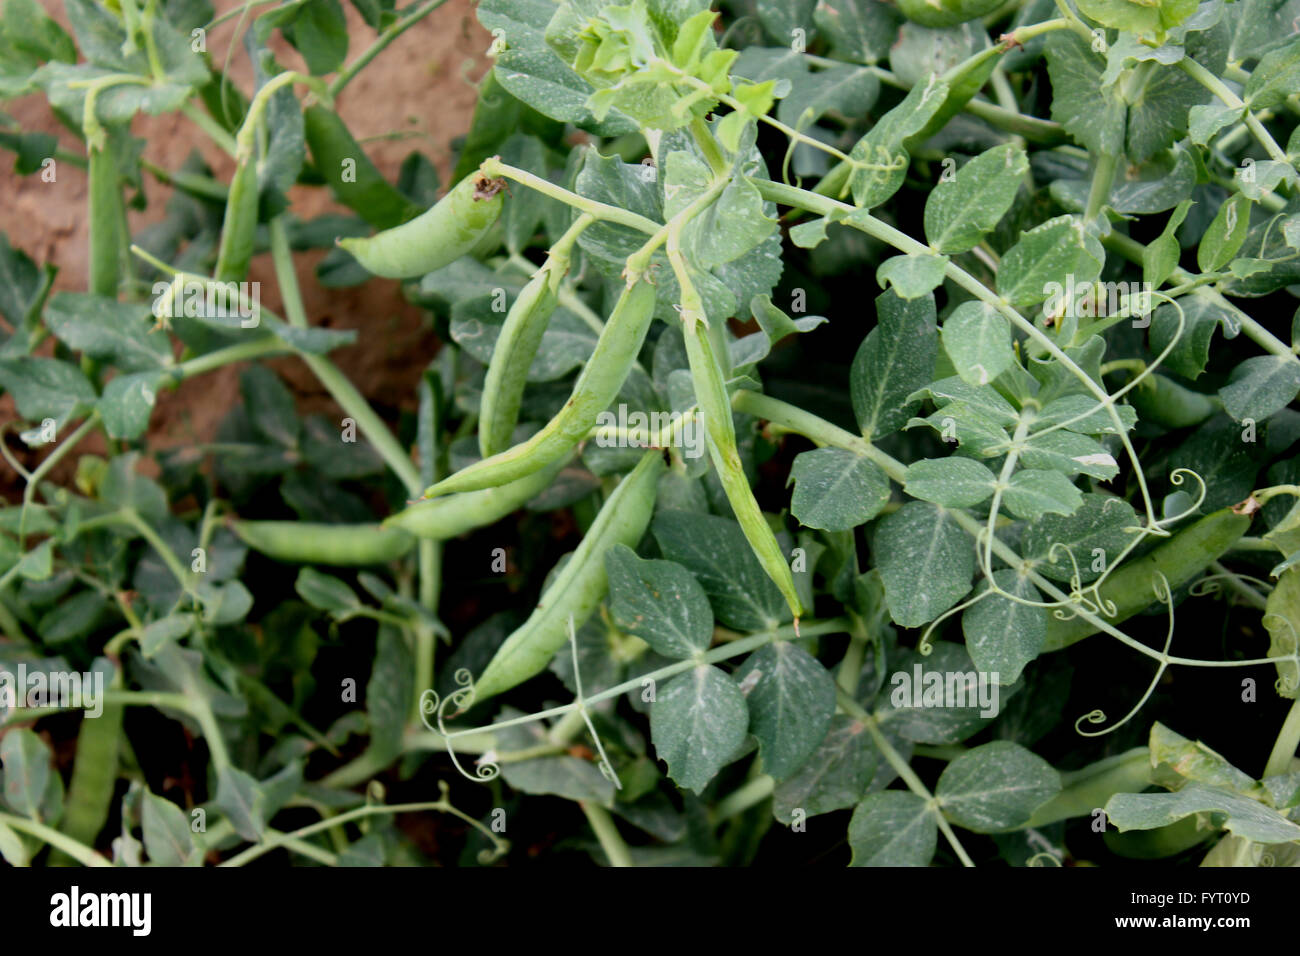 Garden Pea, Pisum sativum, cultivated annual herb with pinnate compound leaves, terminal tendrils, white flowers Stock Photo